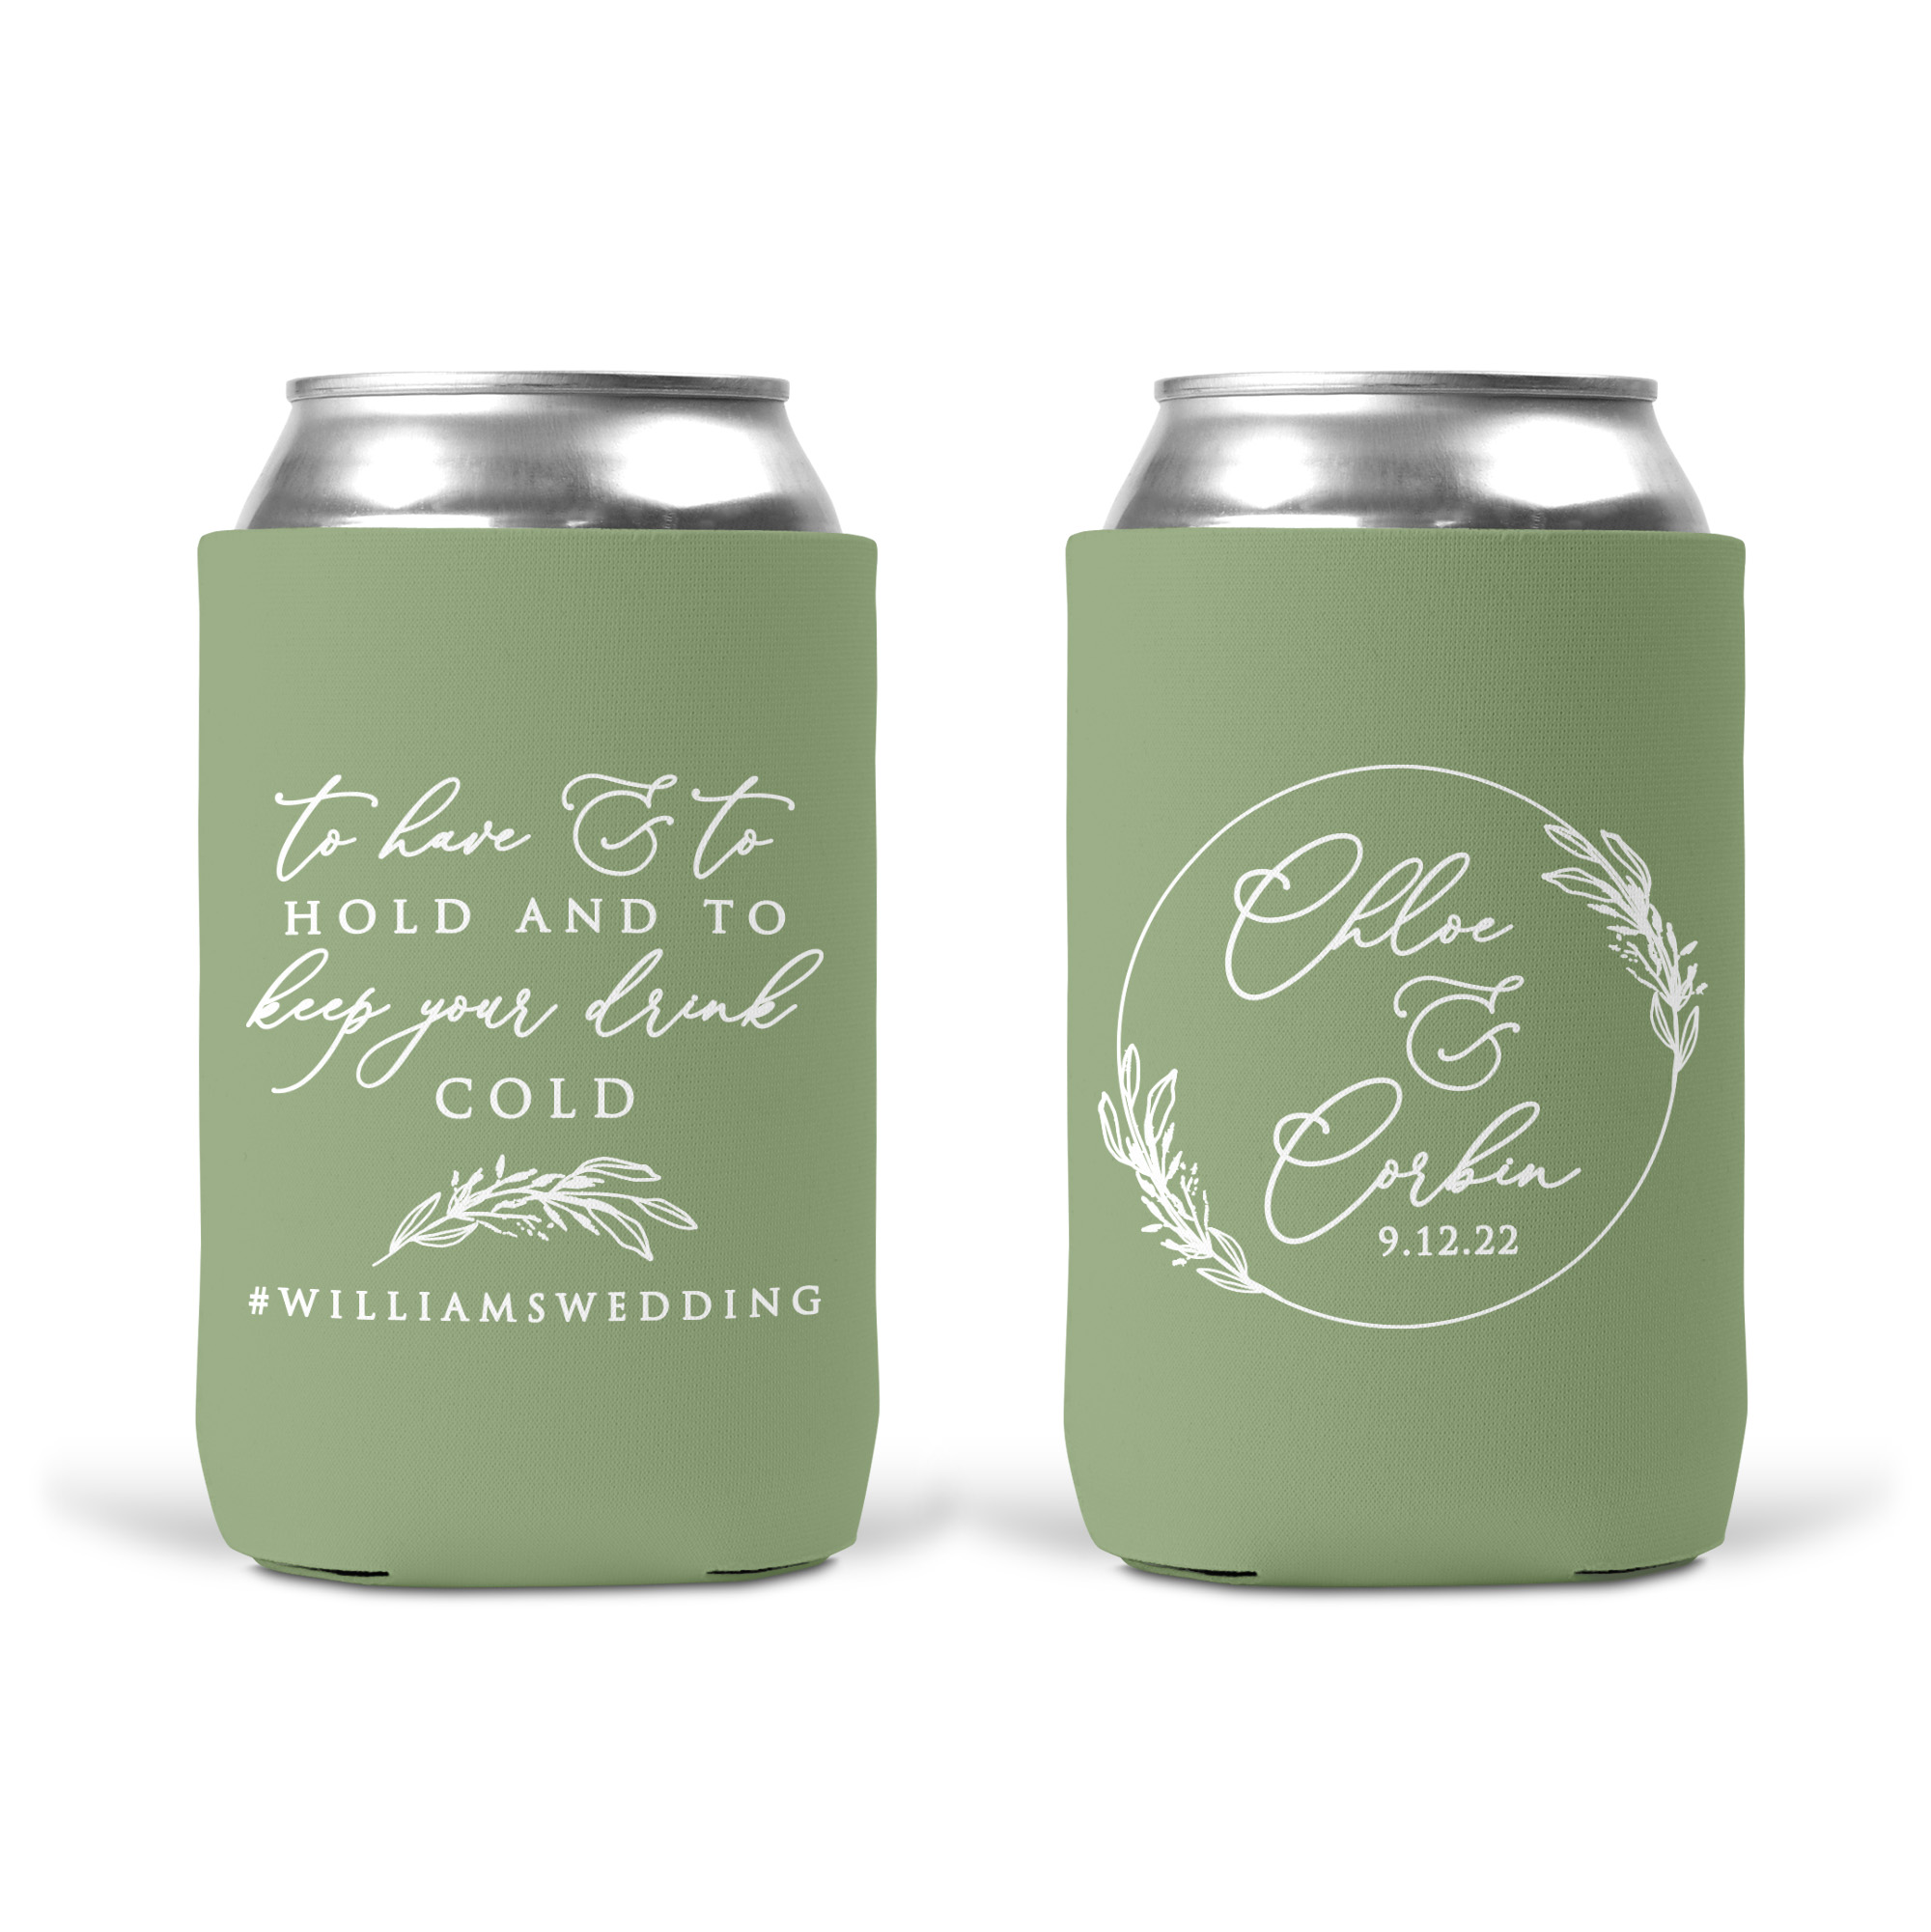 To Have & To Hold and to Keep Your Drink Cold Personalized Wedding Koozie or Wedding Koozy Can Cooler - Style T734